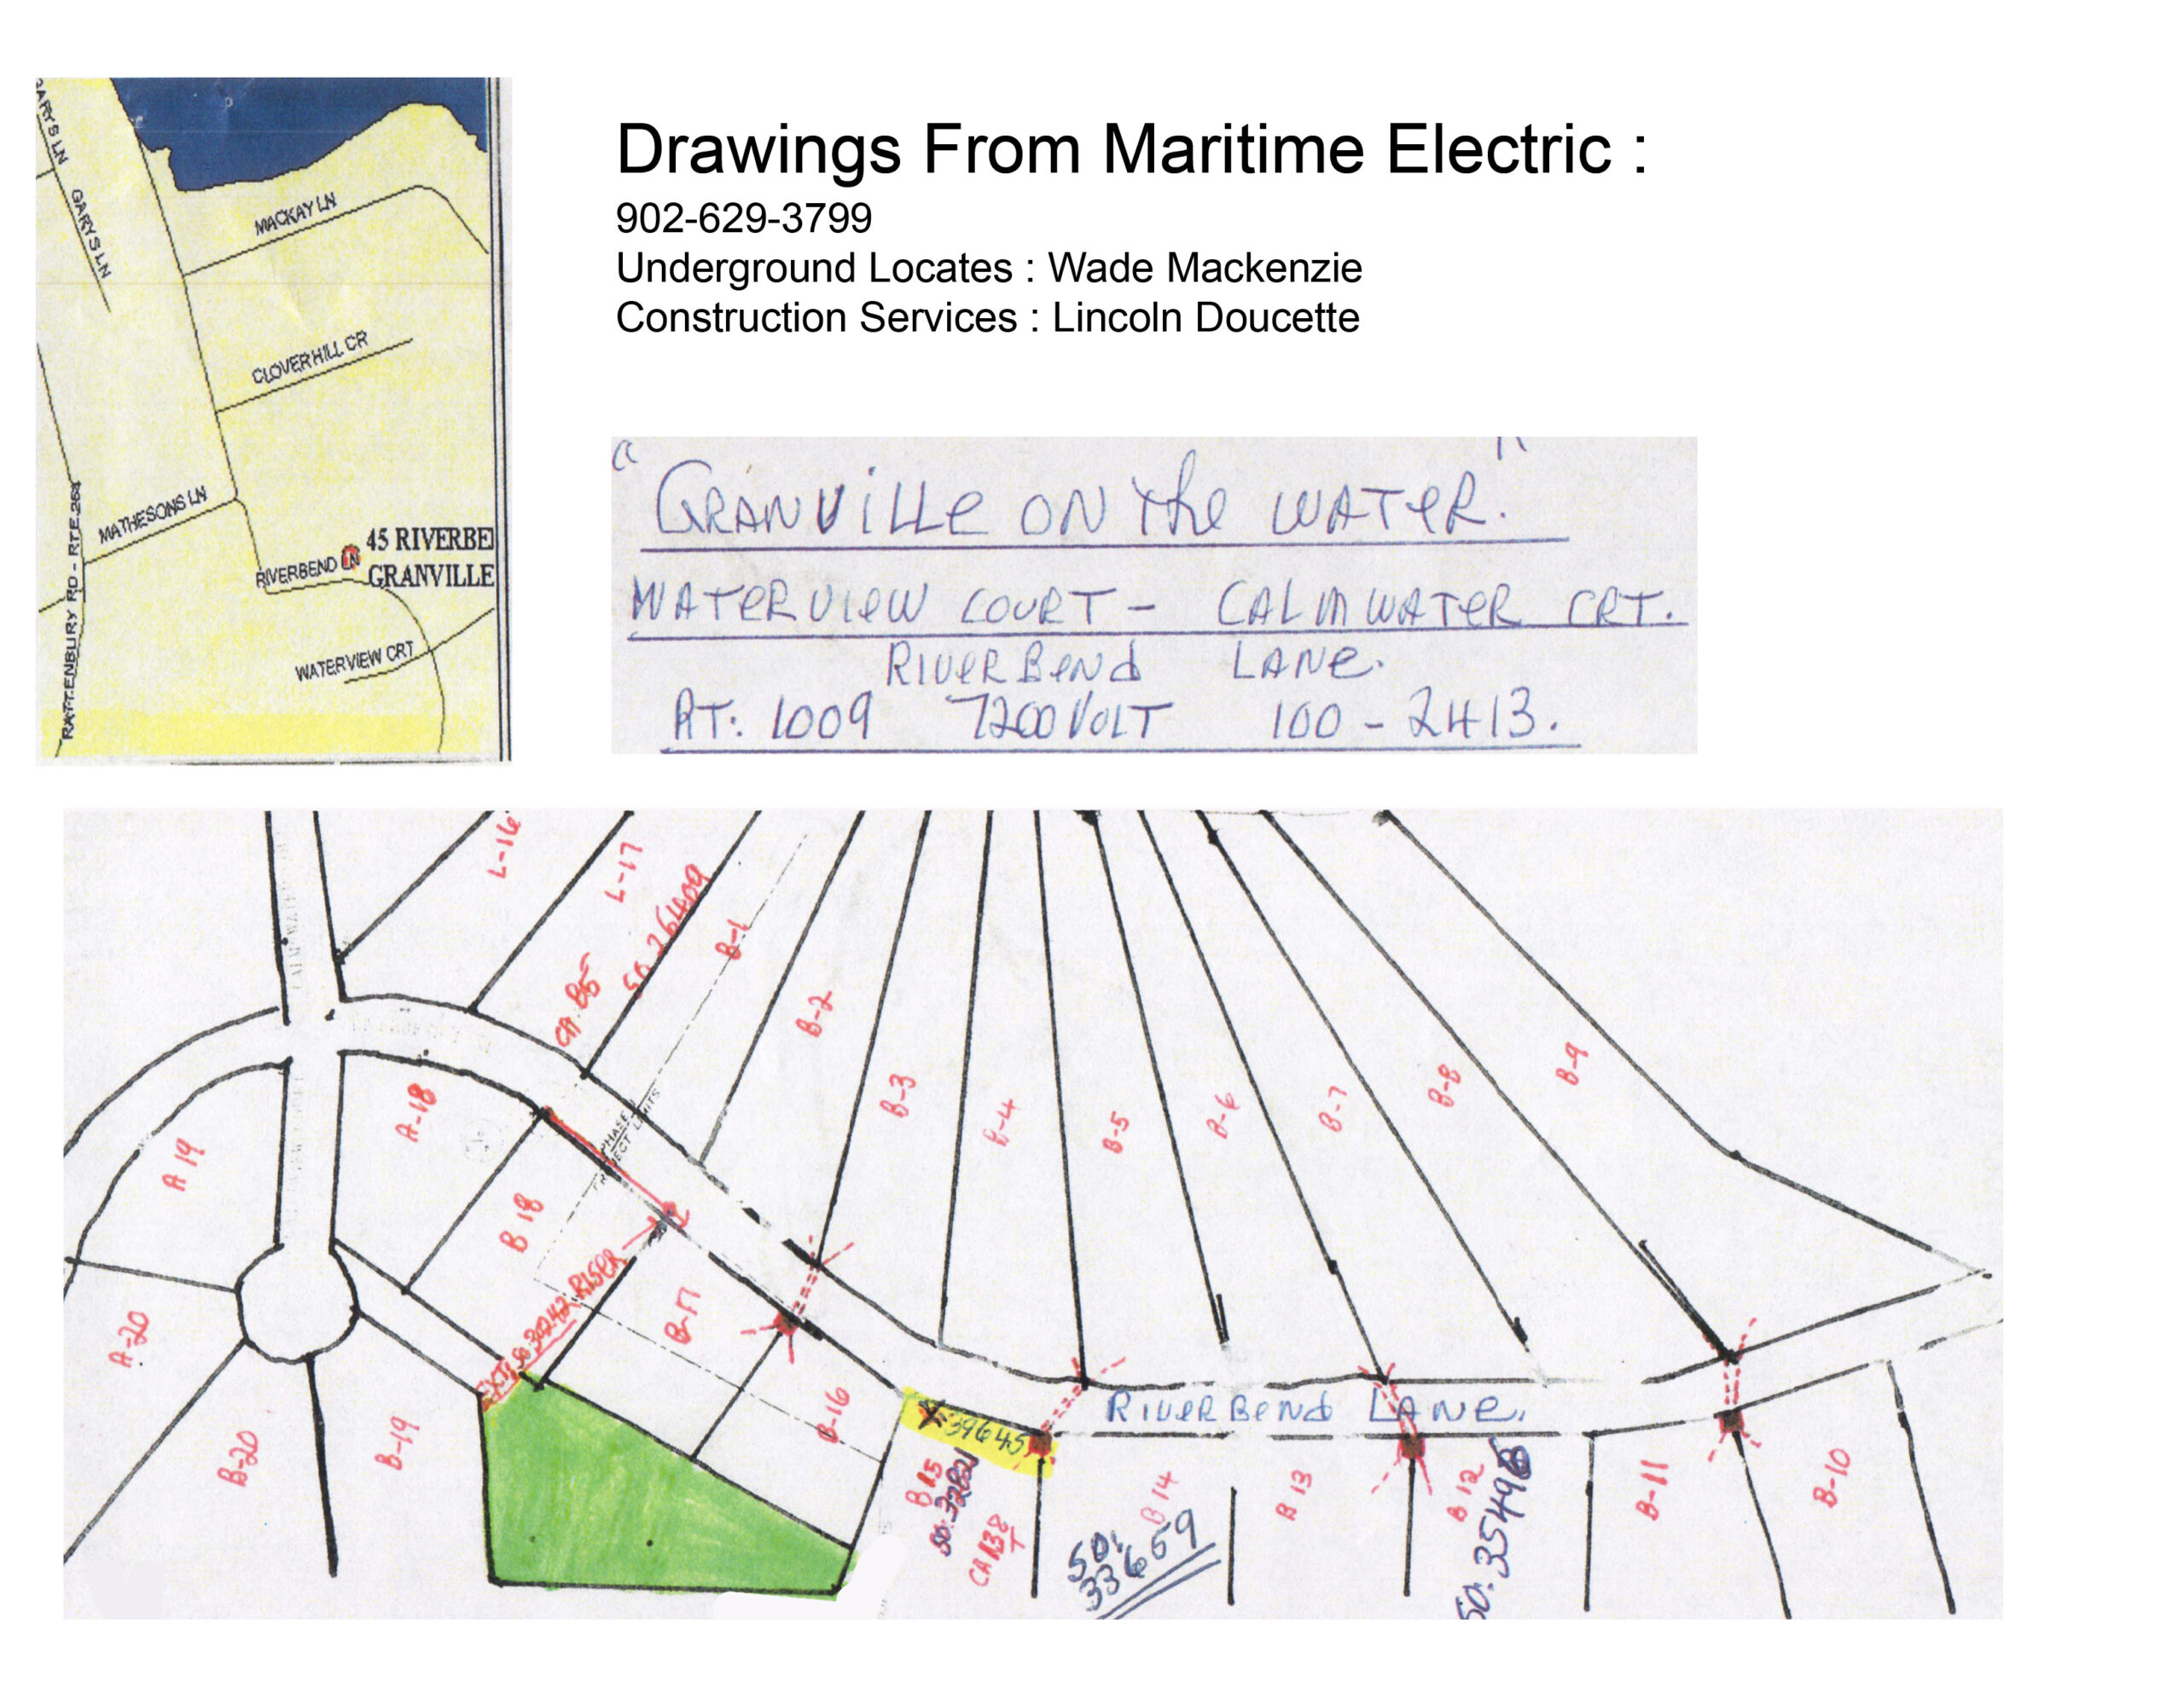 utilities-in-gotw-water-electrical-mapping-granville-on-the-water